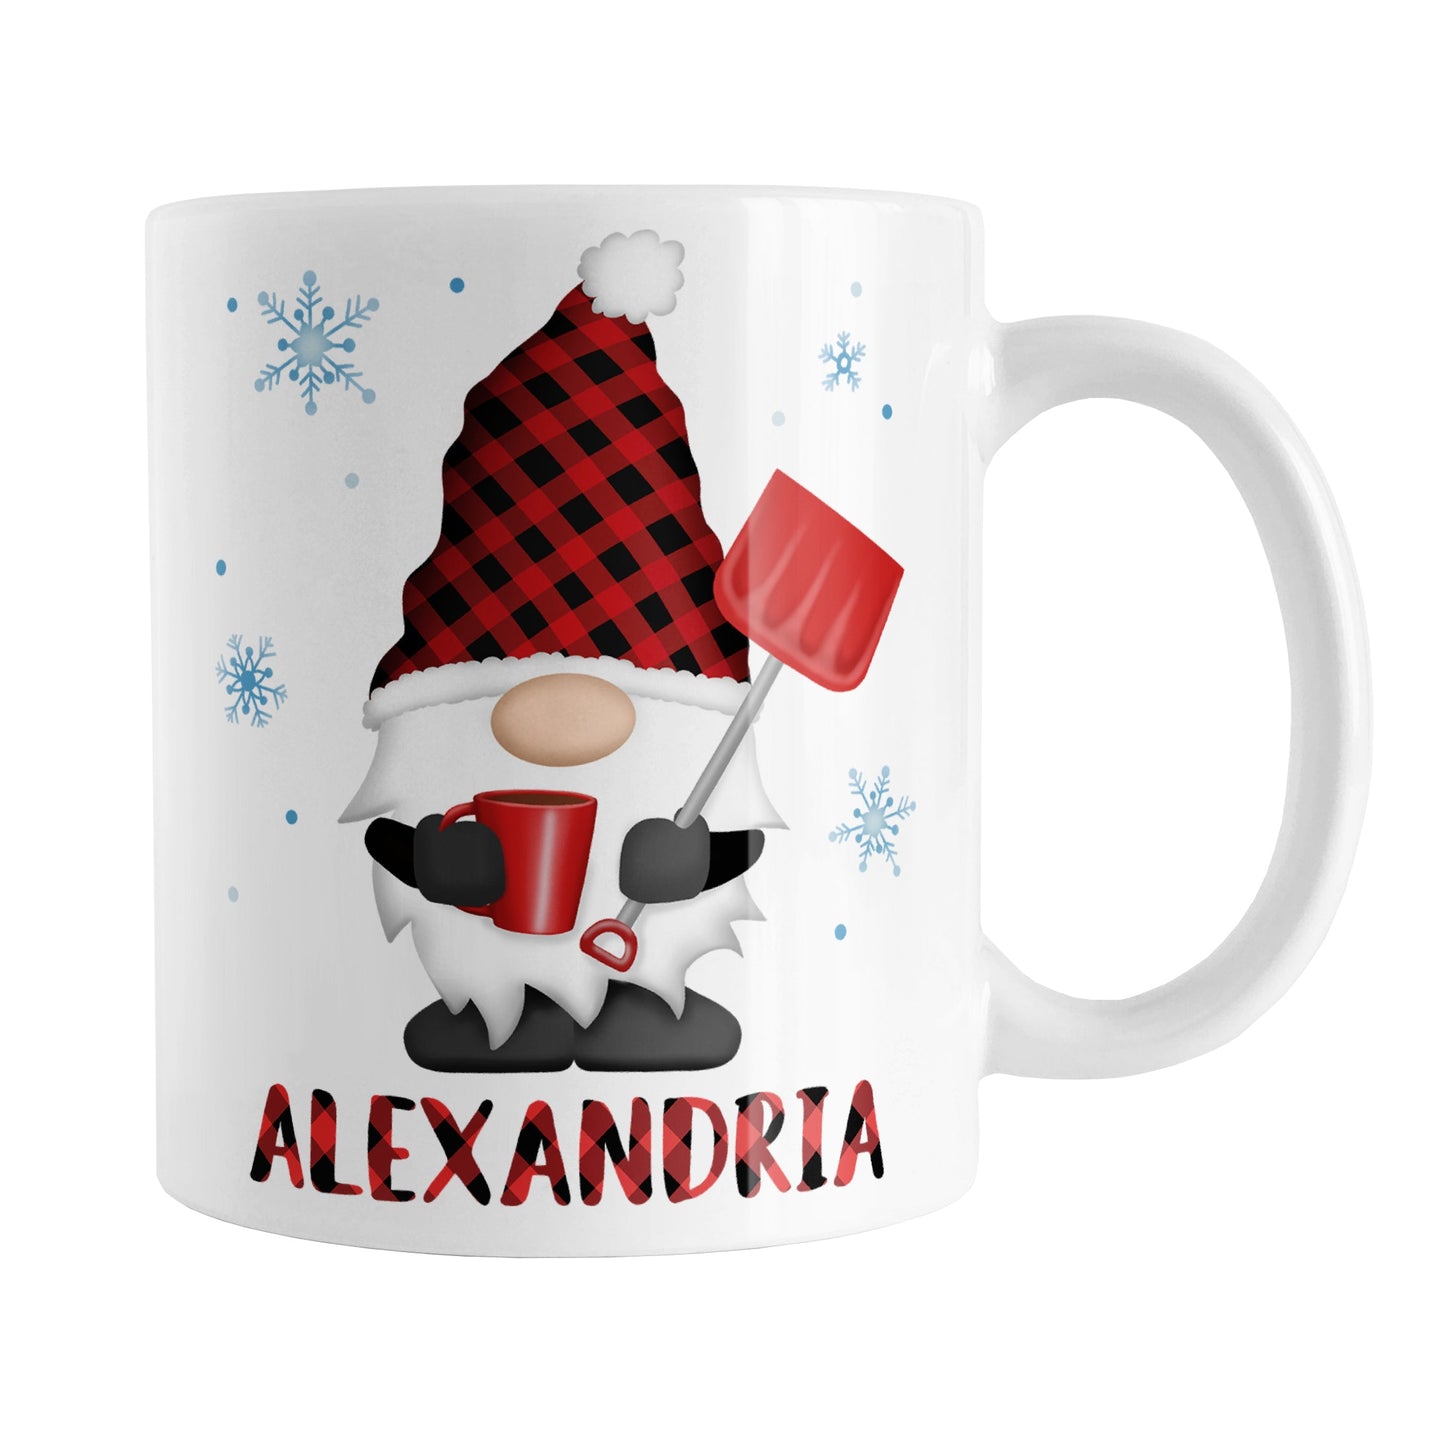 Personalized Red Buffalo Plaid Gnome Mug (11oz) at Amy's Coffee Mugs. A ceramic coffee mug designed with a gnome with a red and black buffalo plaid pattern hat and holding a hot beverage and snow shovel with snowflakes around it. This cute buffalo plaid gnome illustration, along with your name personalized in buffalo plaid below the gnome, is on both sides of the mug. 